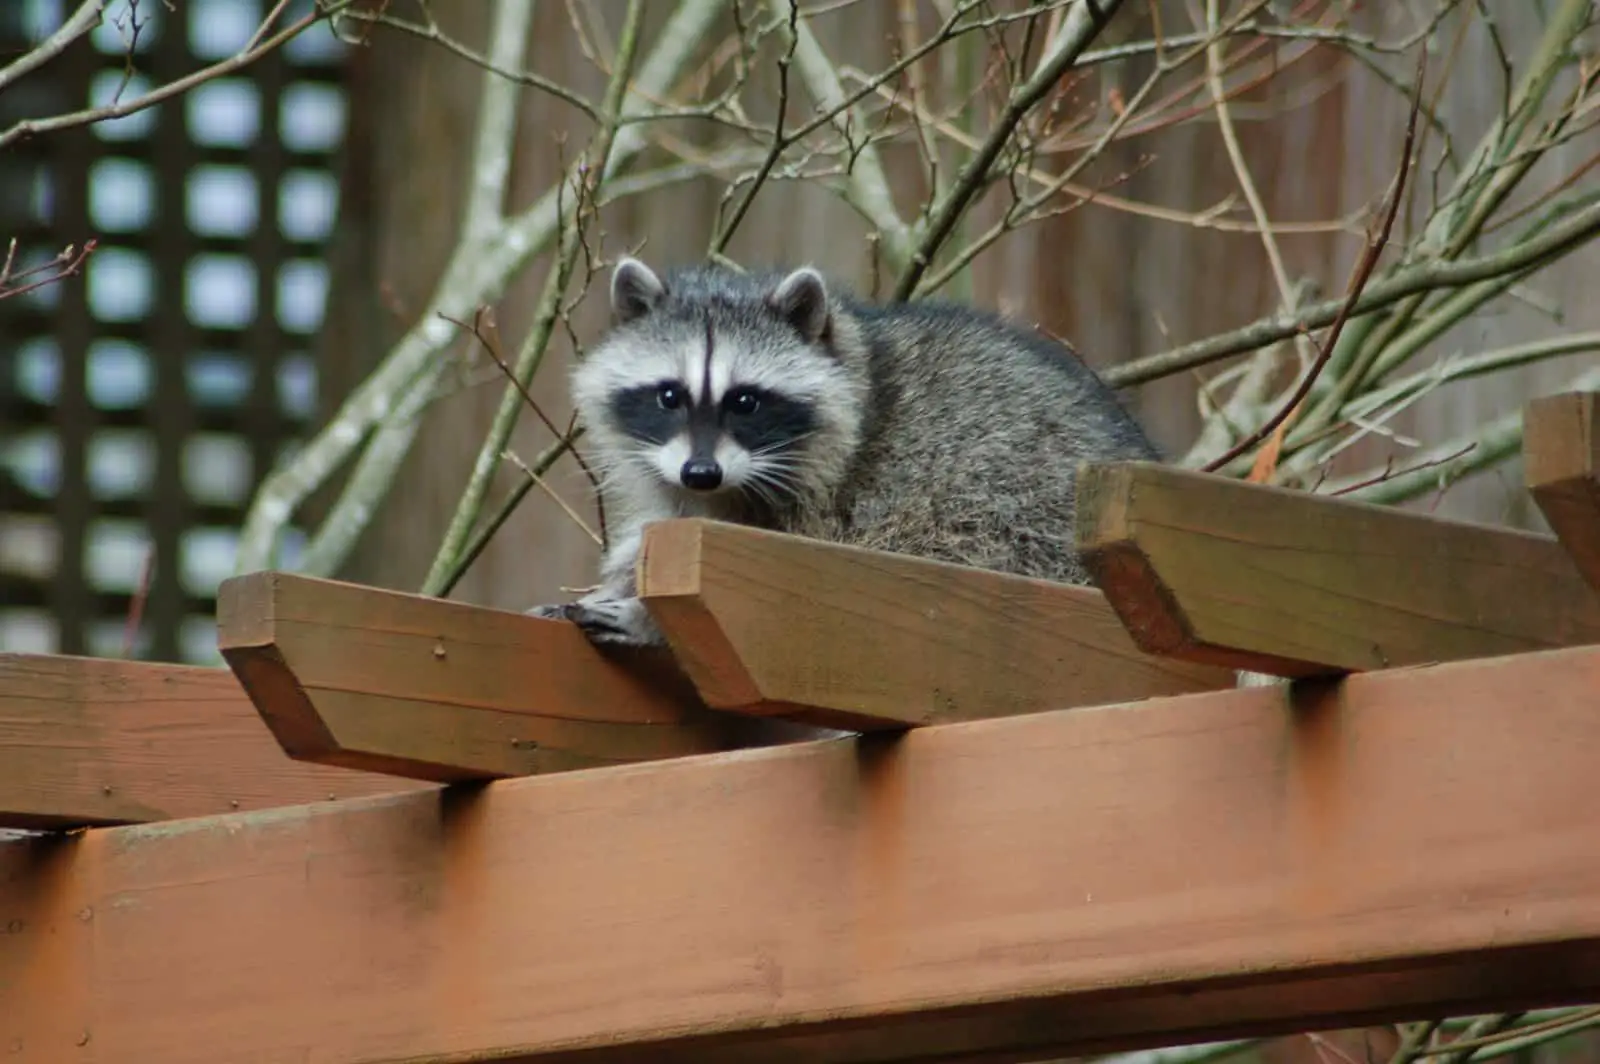 How do wildlife removal experts get rid of raccoons?